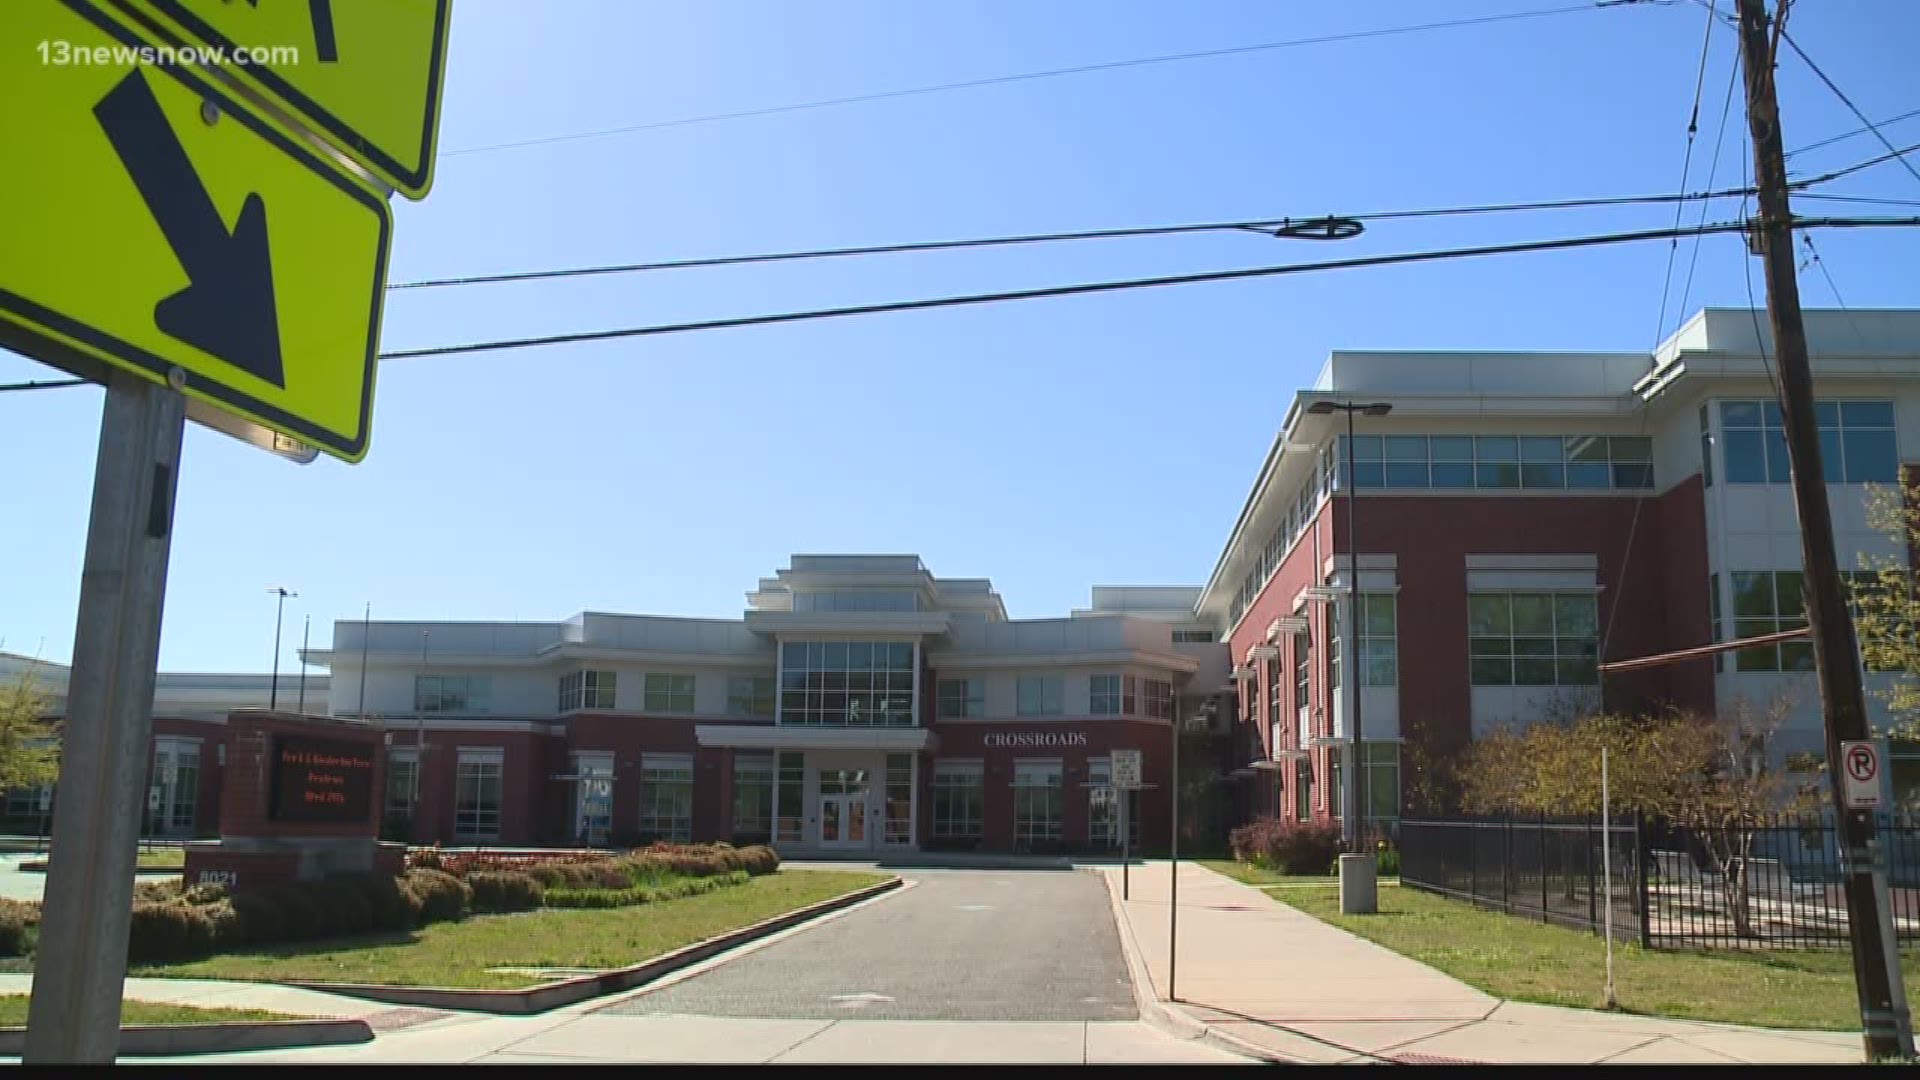 Norfolk police are investigating an incident that happened near an elementary school this week.